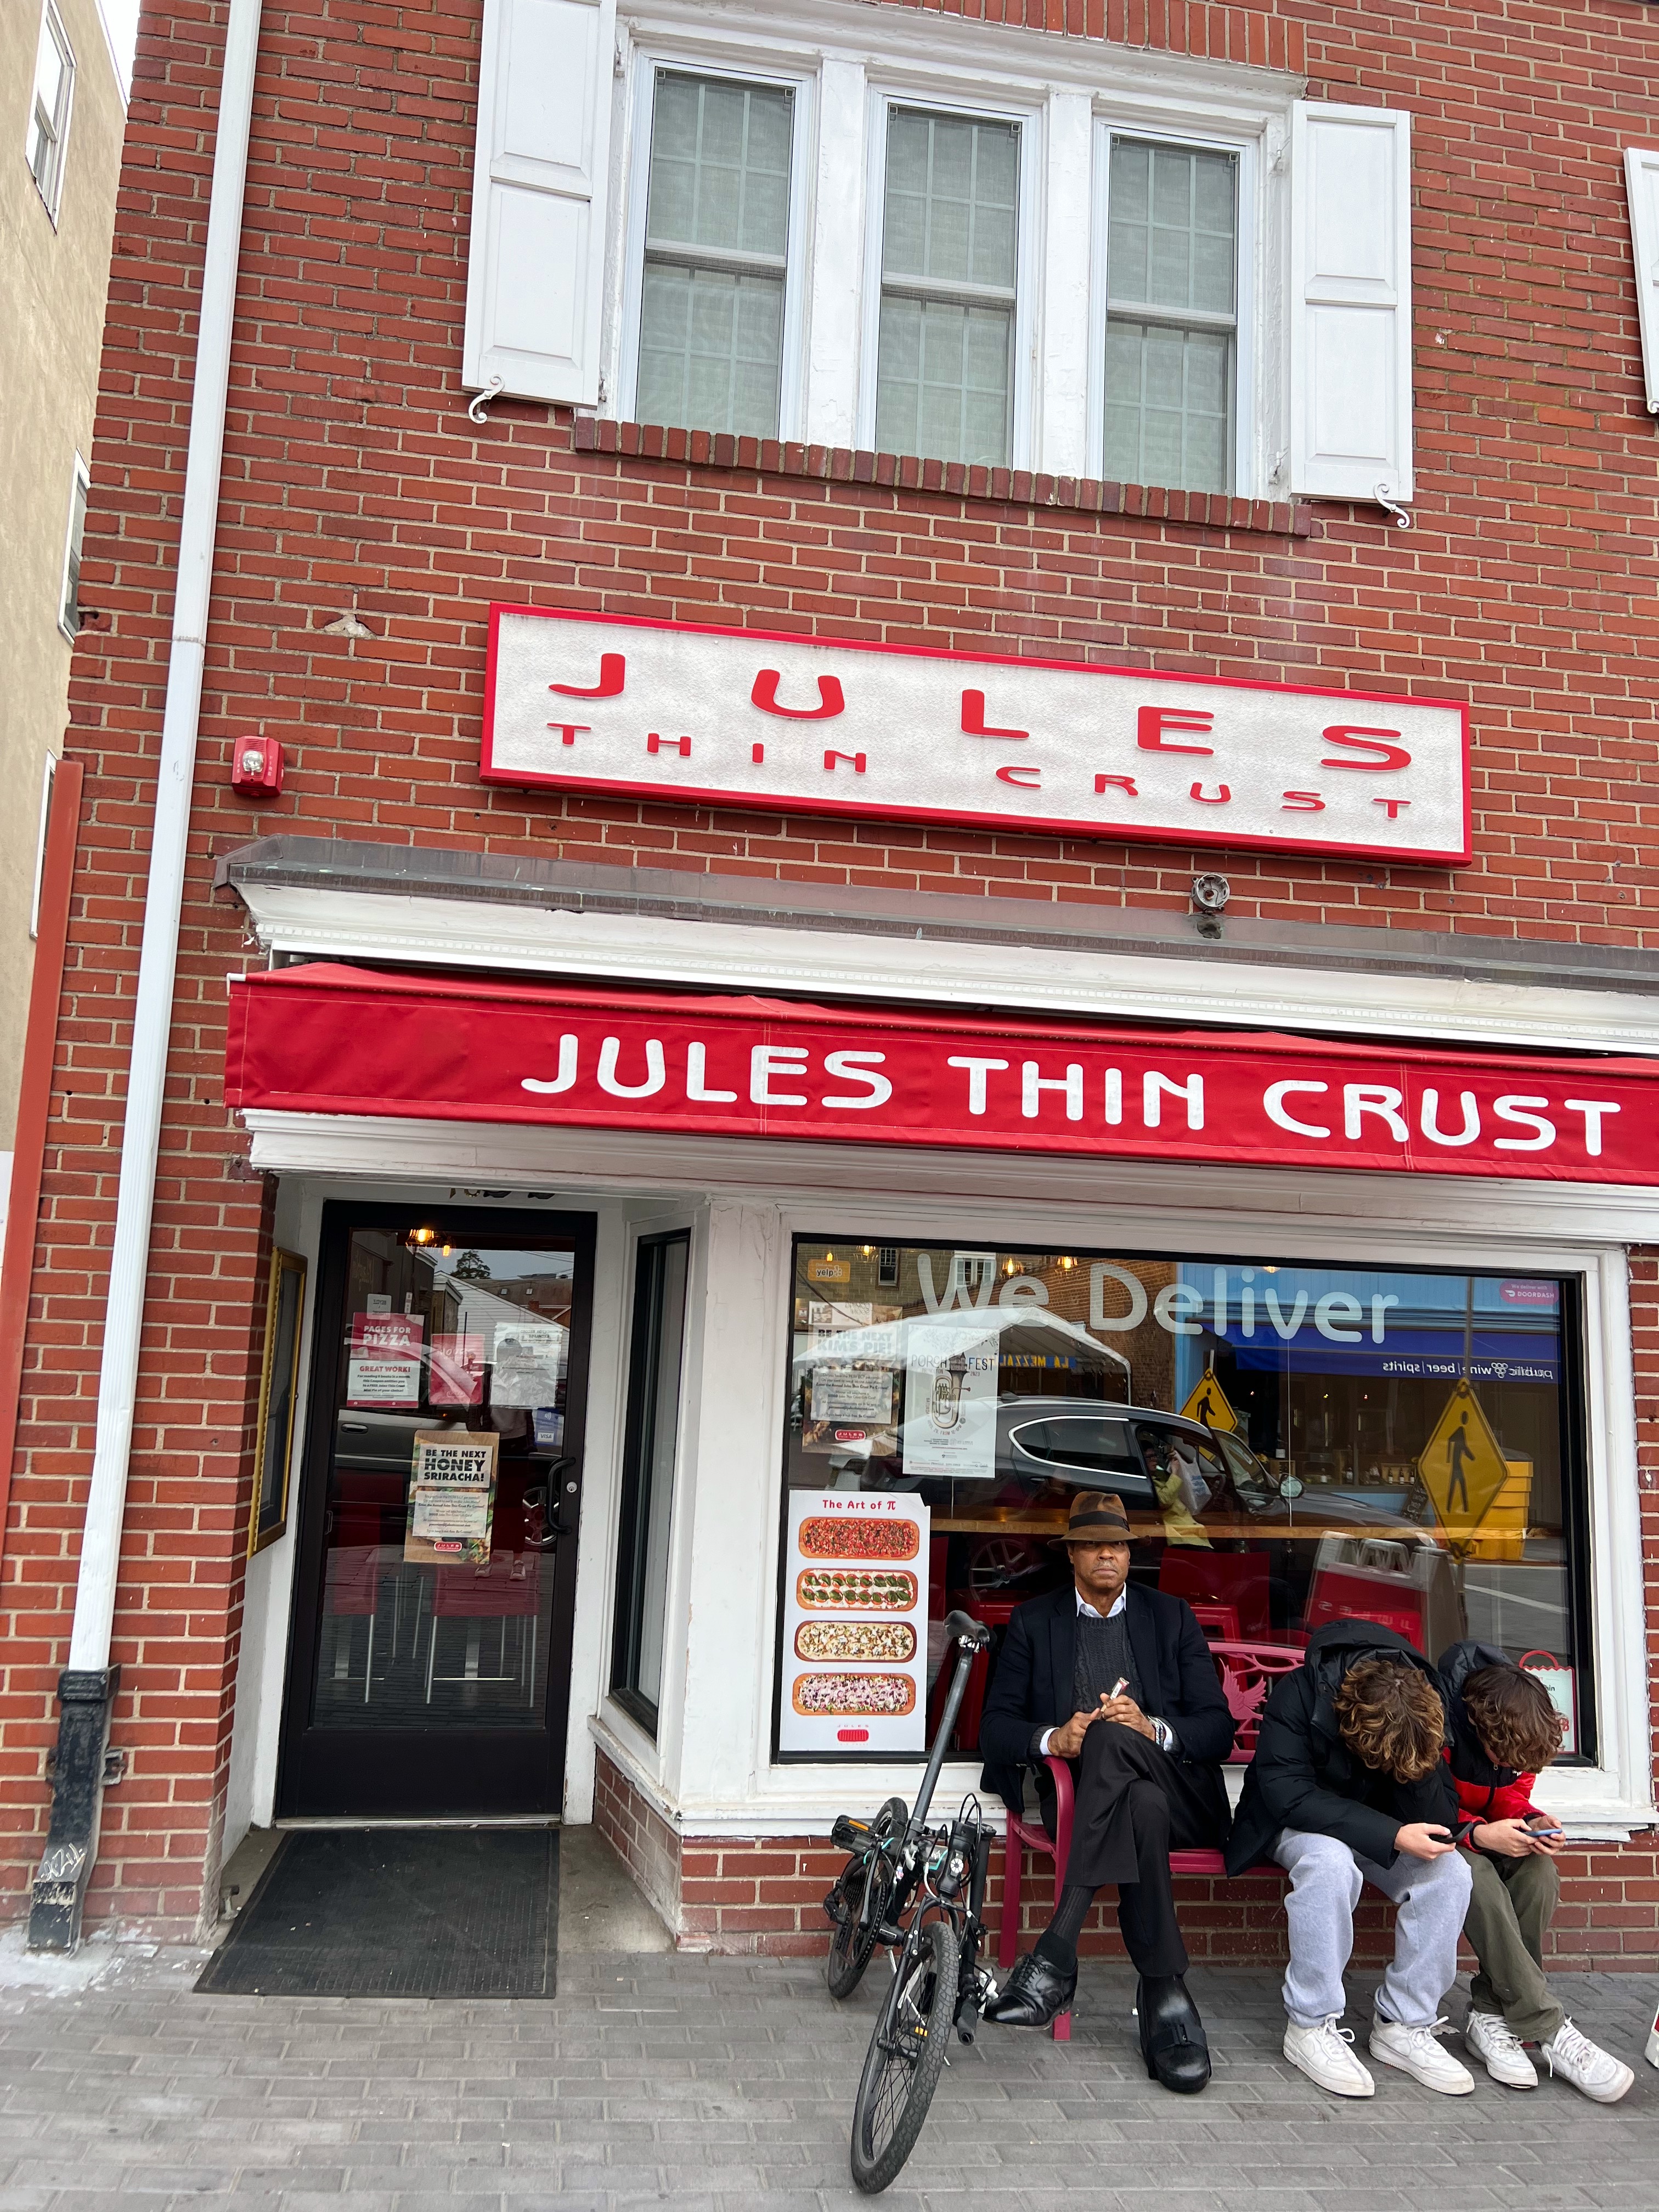 Exterior of Jules Thin Crust, red brick building with white shutters and trim, a Jules Thin Crust sign and red awning